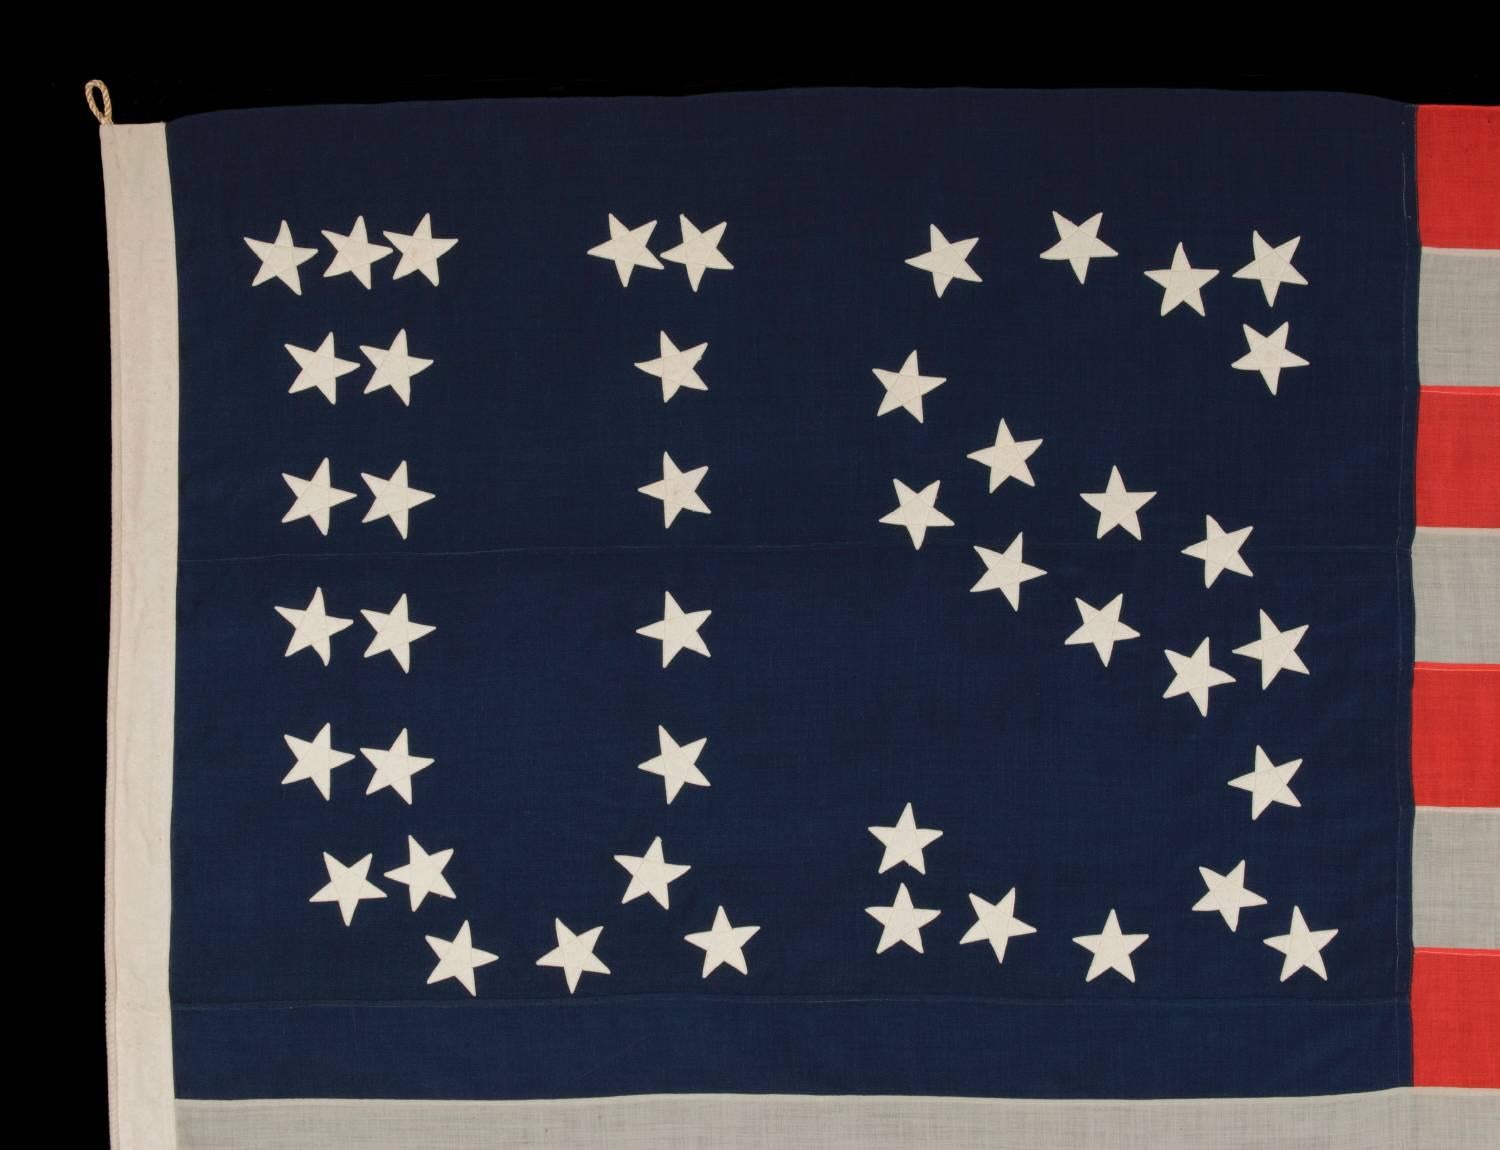 44 STARS CONFIGURED INTO THE LETTERS “U.S.”, PATENTED IN 1890 BY W.R. WASHBURN, ONE OF ONLY FOUR KNOWN SURVIVING EXAMPLES AND ONE OF THE BOLDEST DESIGNS KNOWN TO EXIST IN EARLY FLAGS:

Extremely rare 44 star American national flag with its stars